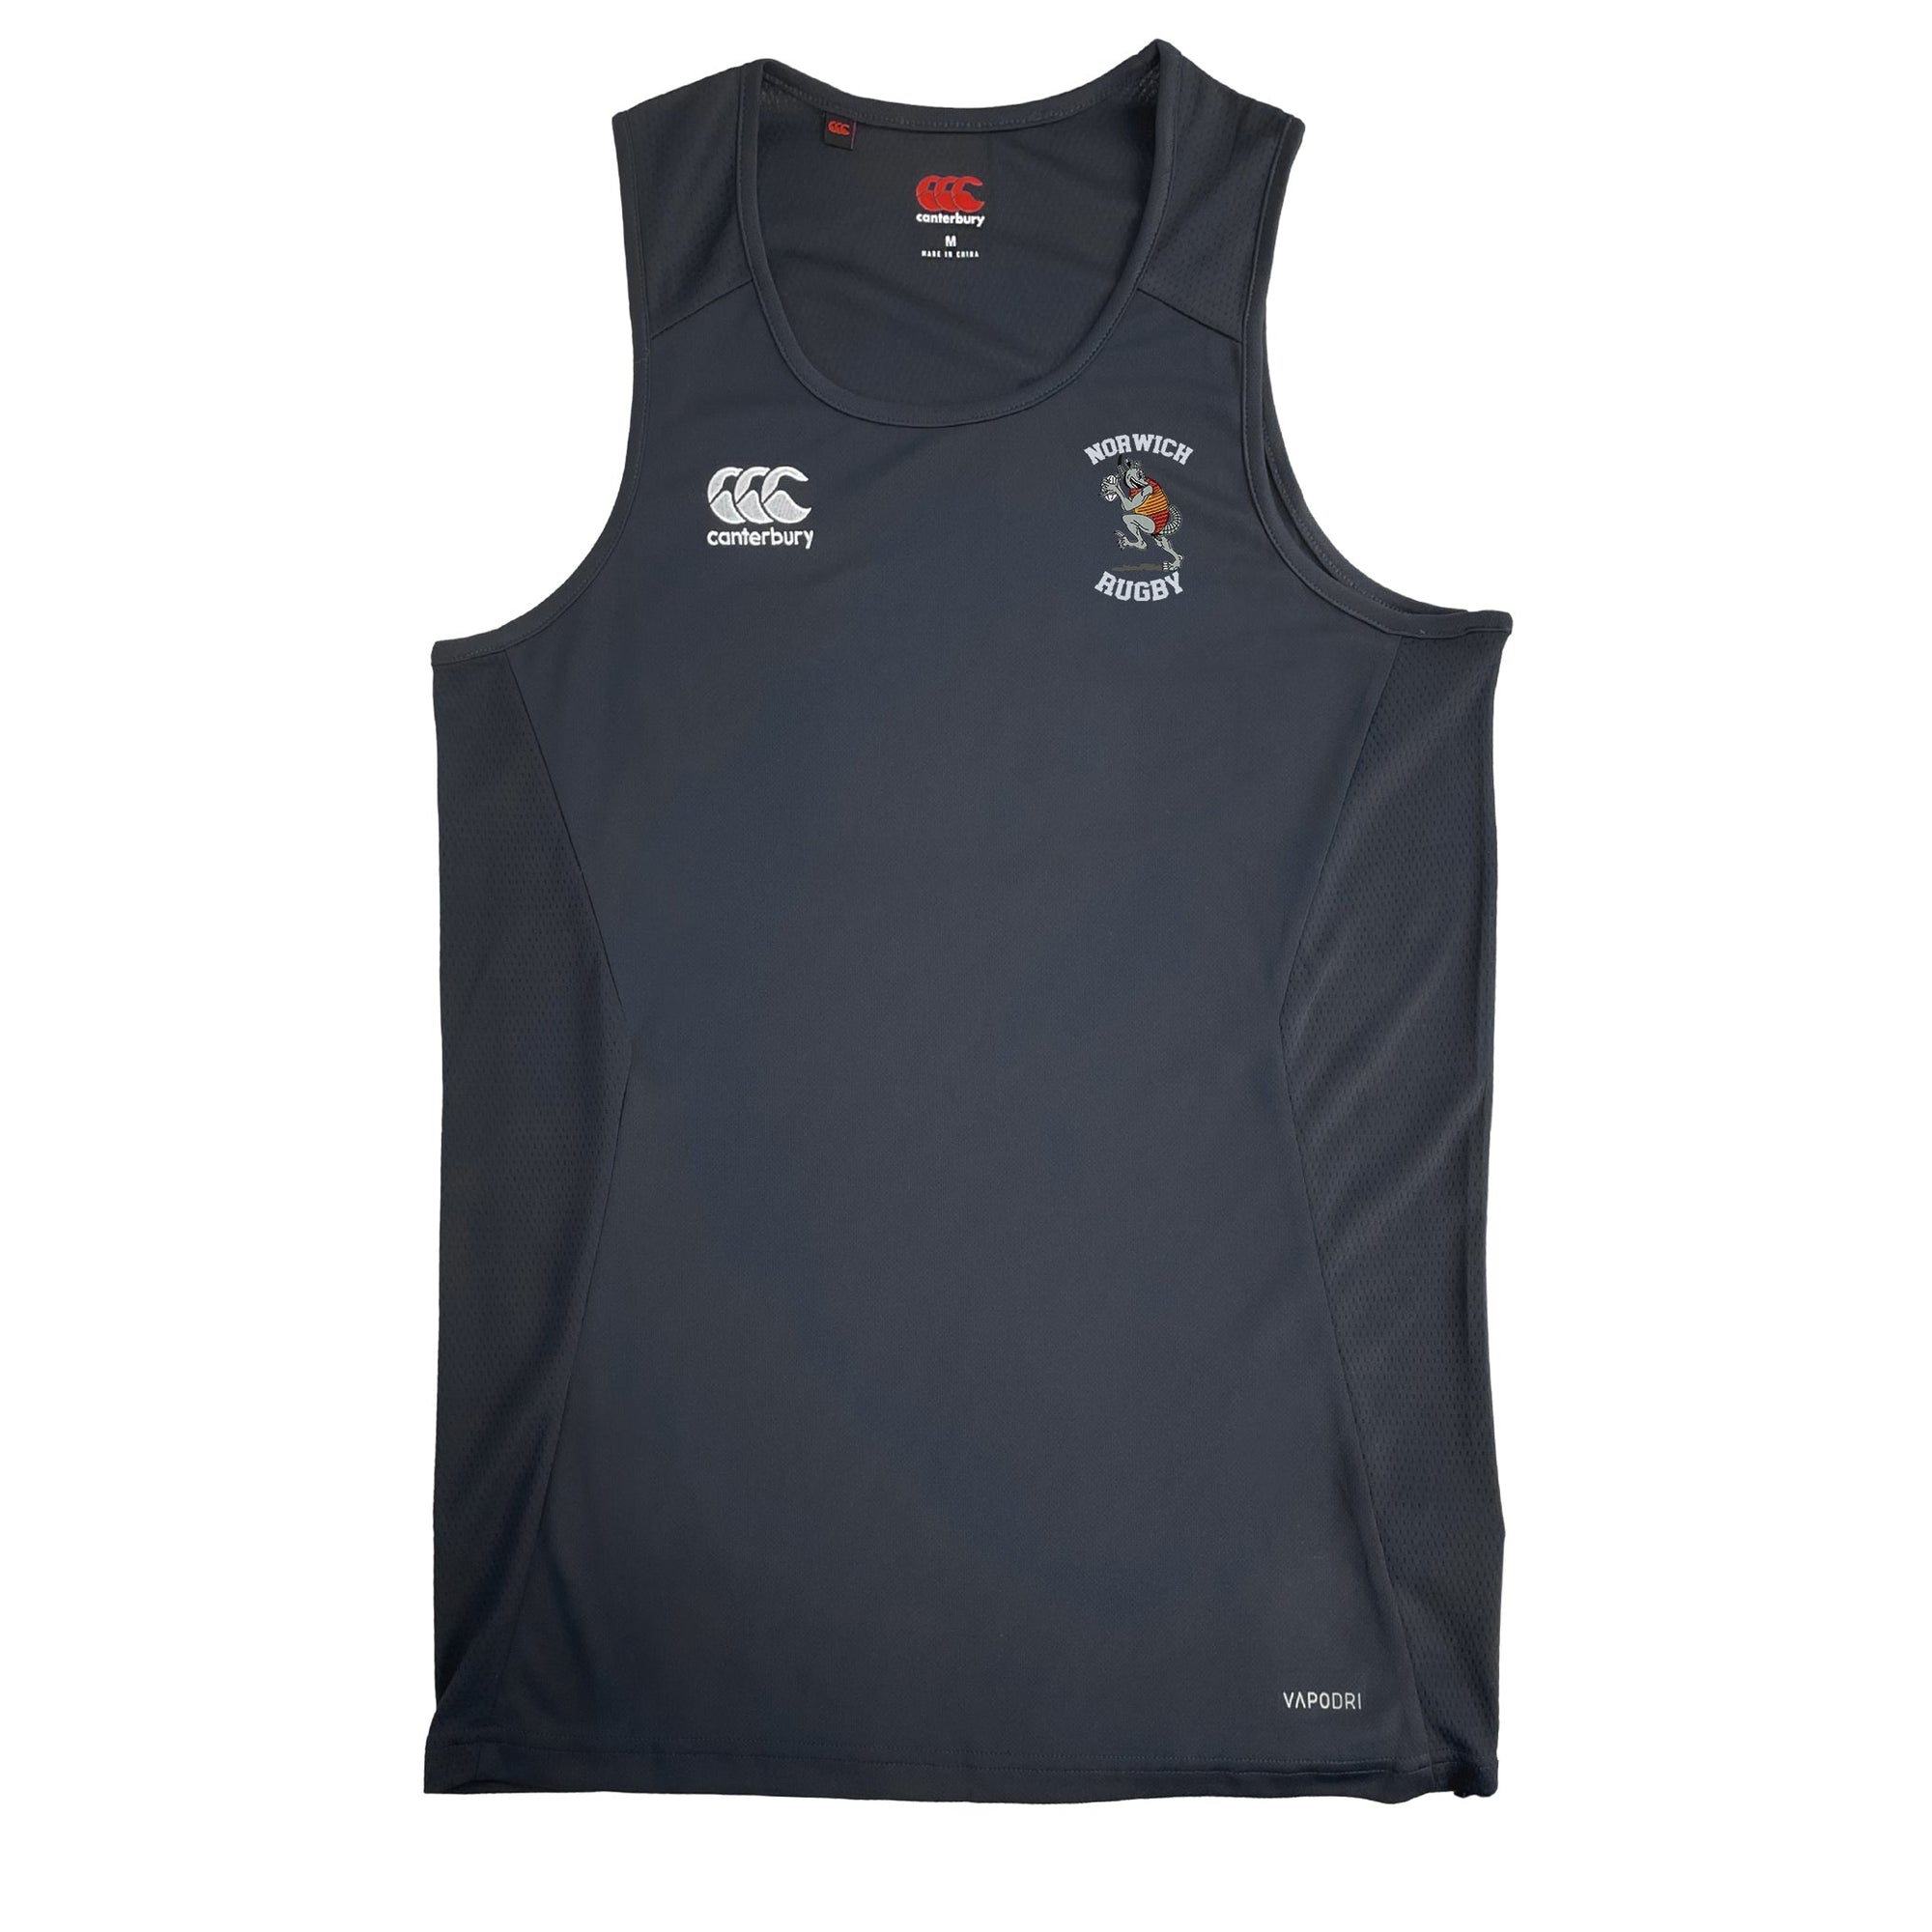 Rugby Imports Norwich Rugby CCC Dry Singlet